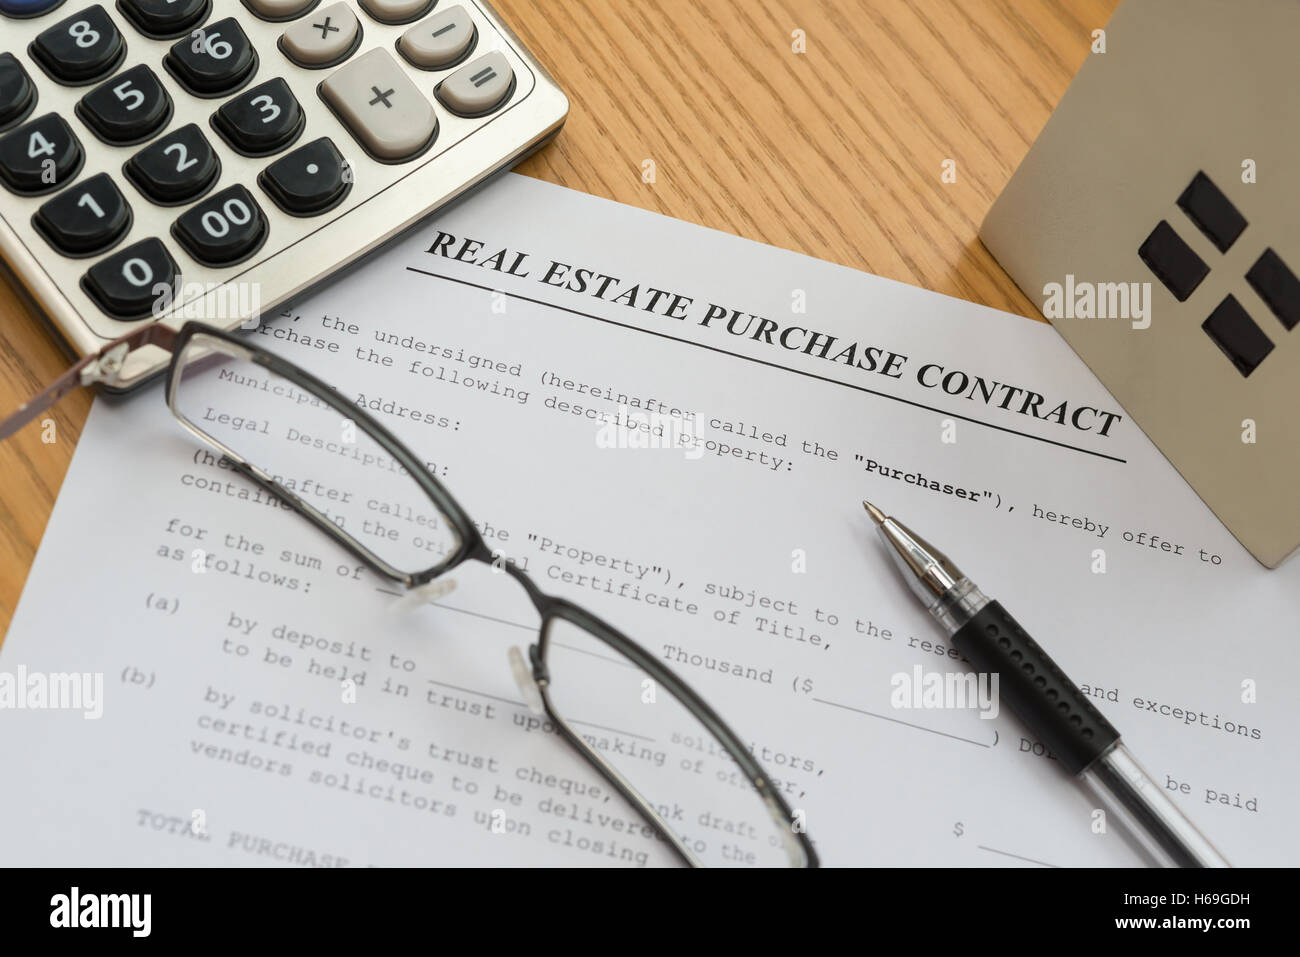 real estate purchase contact with an architectural model and a calculator Stock Photo